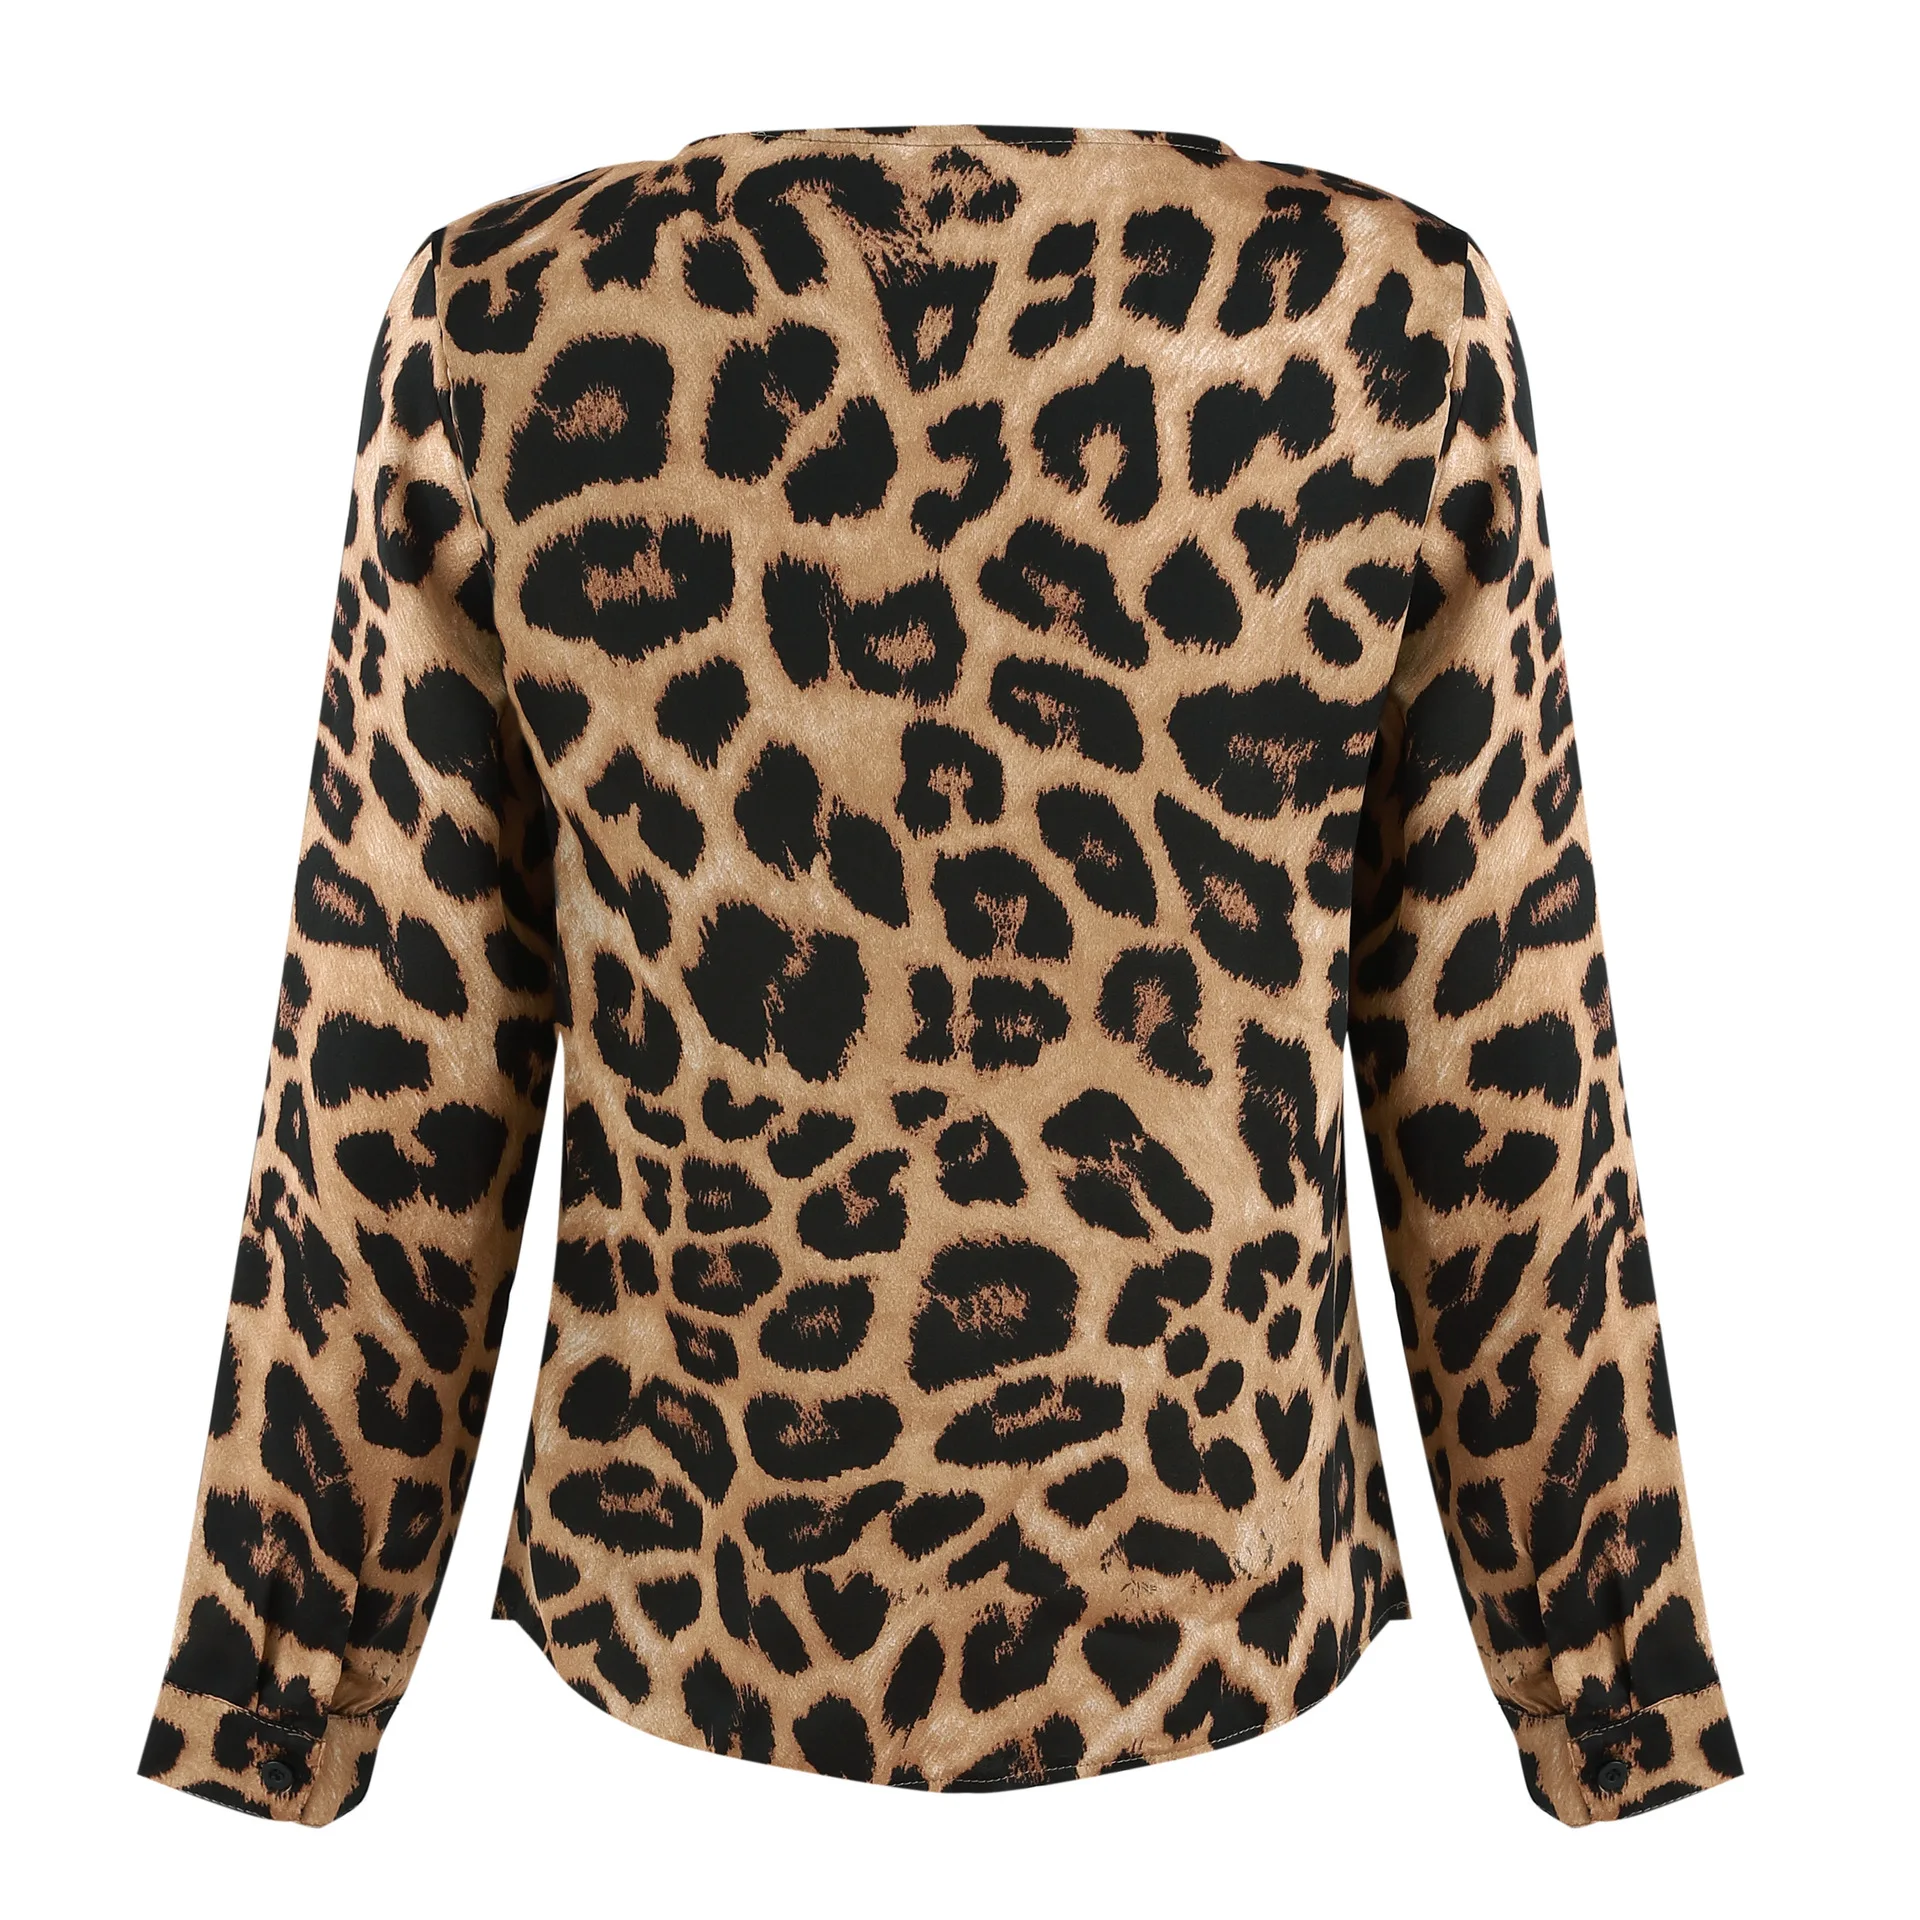 Vintage Women Ladies Leopard Print Loose Long Sleeve V-Neck Sexy Tops Blouses Female Fashion Shirts Blouses Top Clothing hot